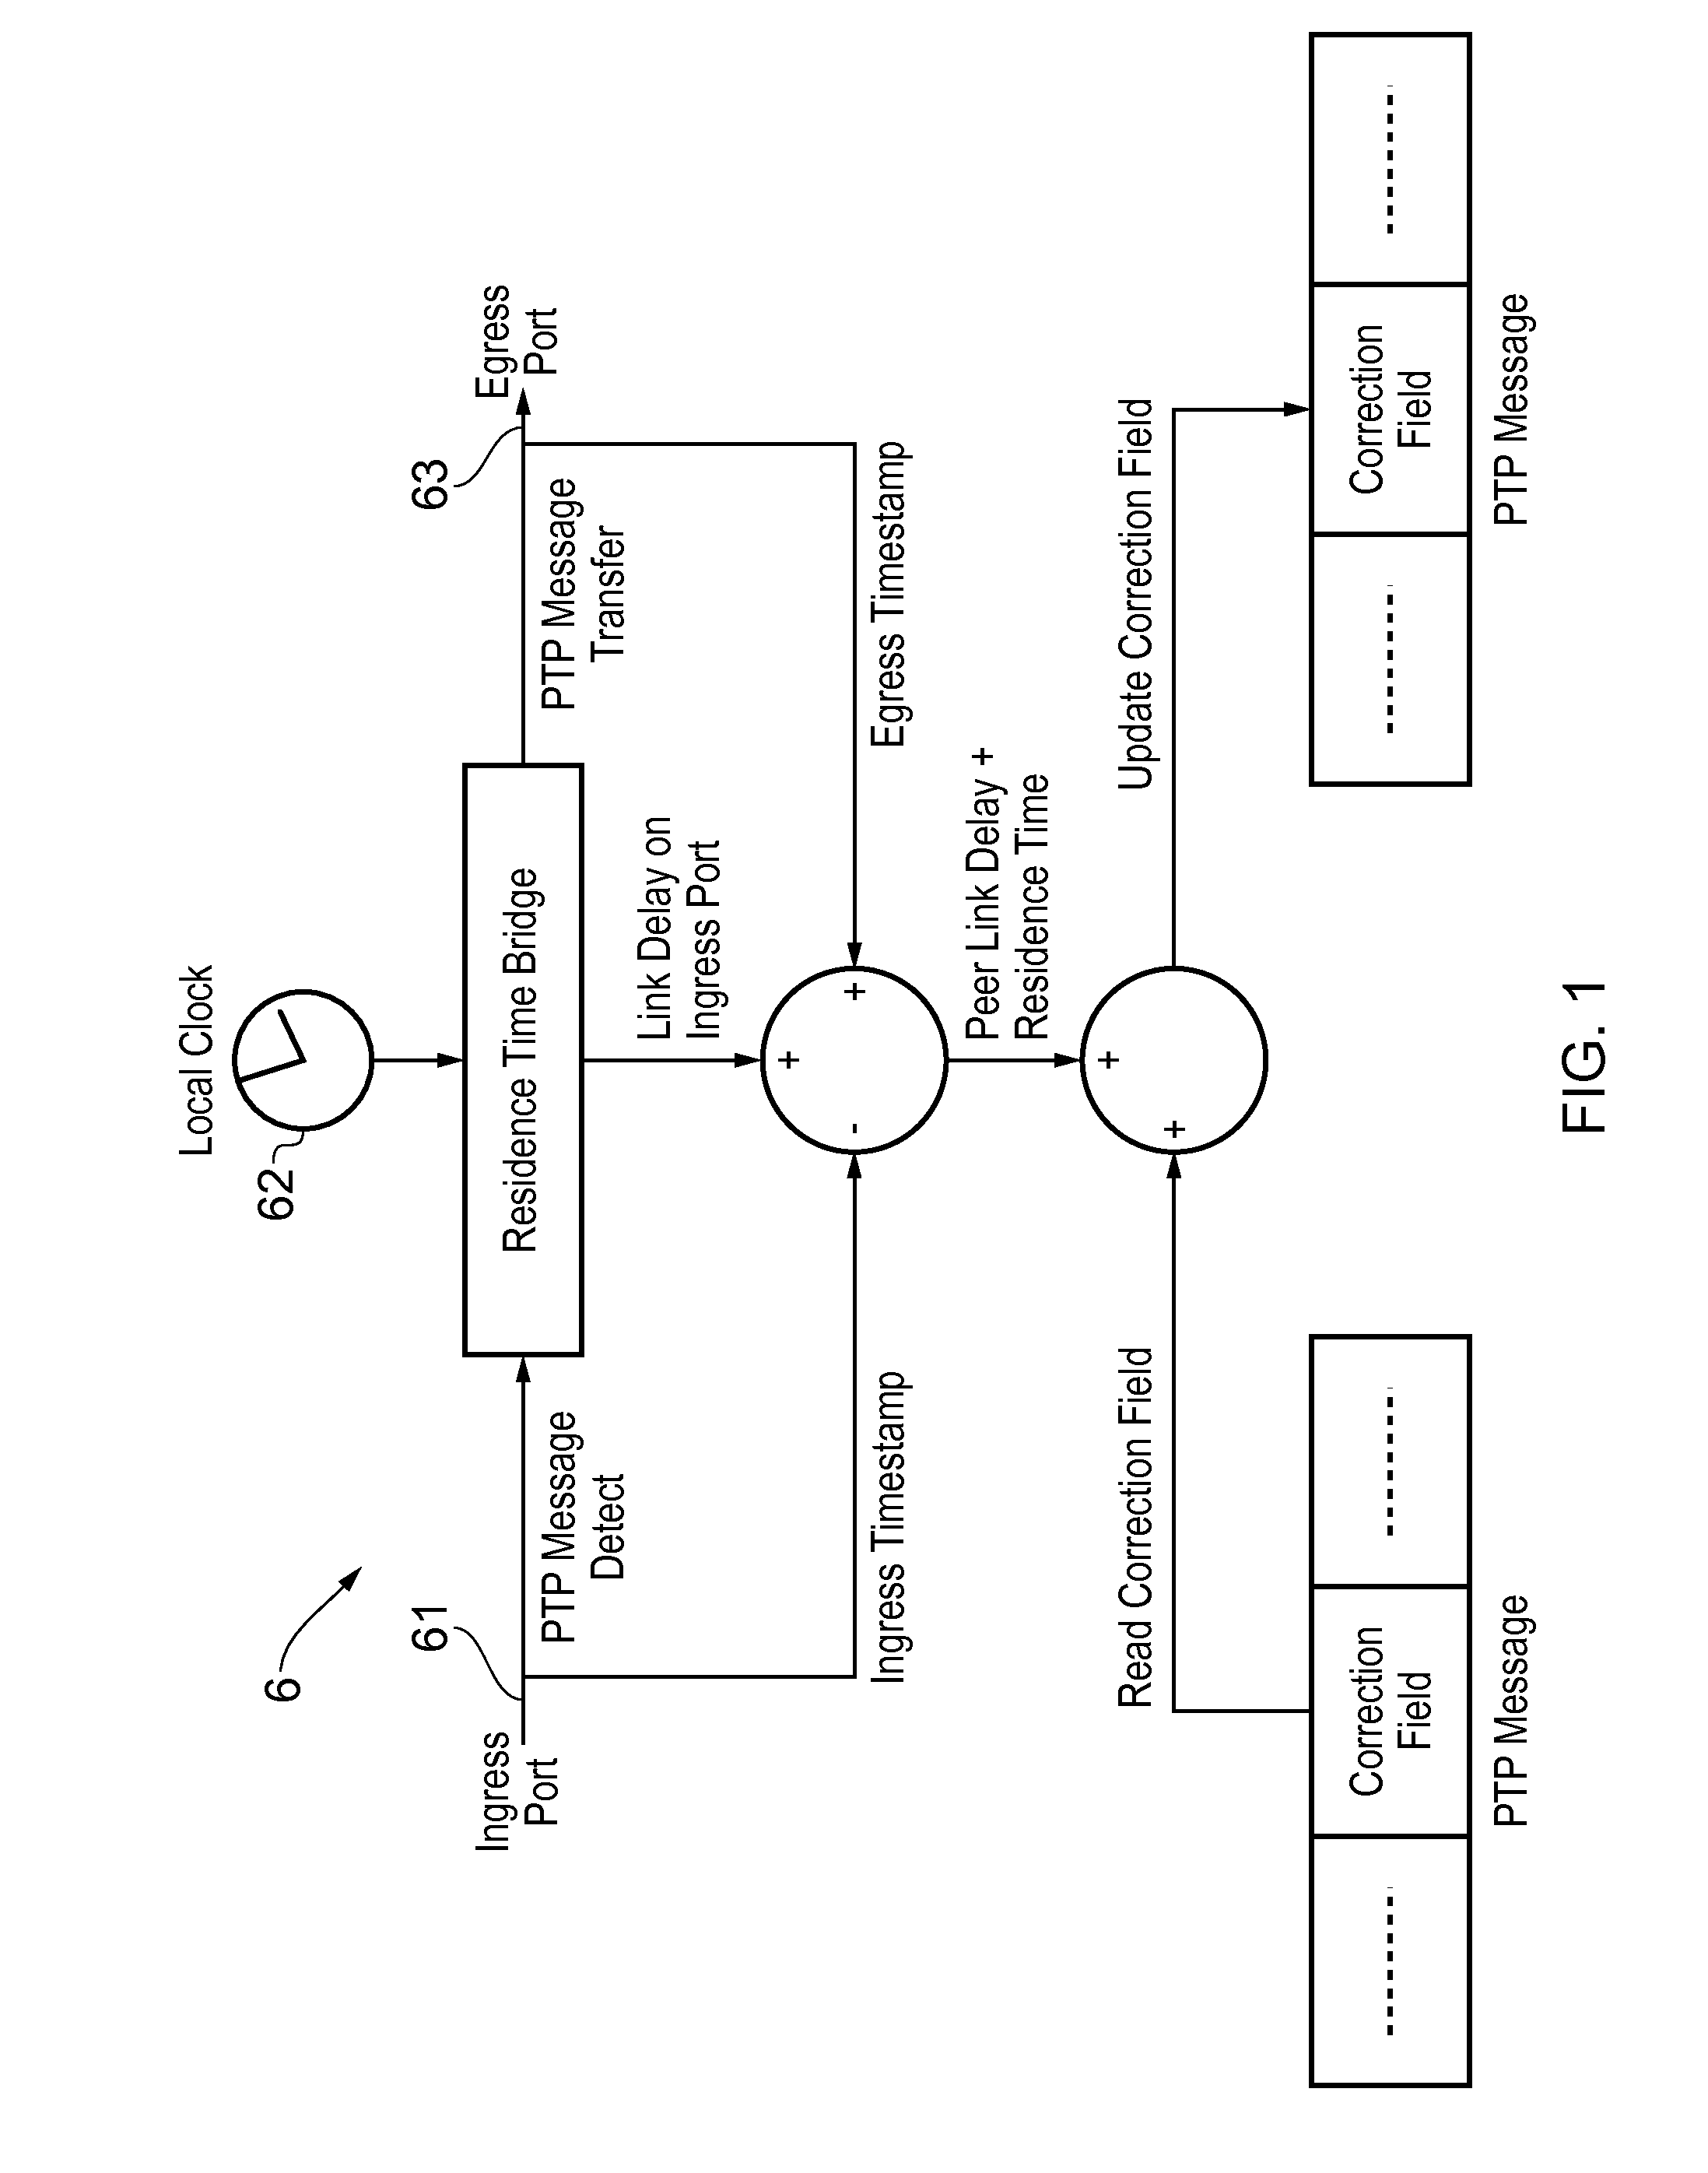 Method and devices for time transfer using peer-to-peer transparent clocks